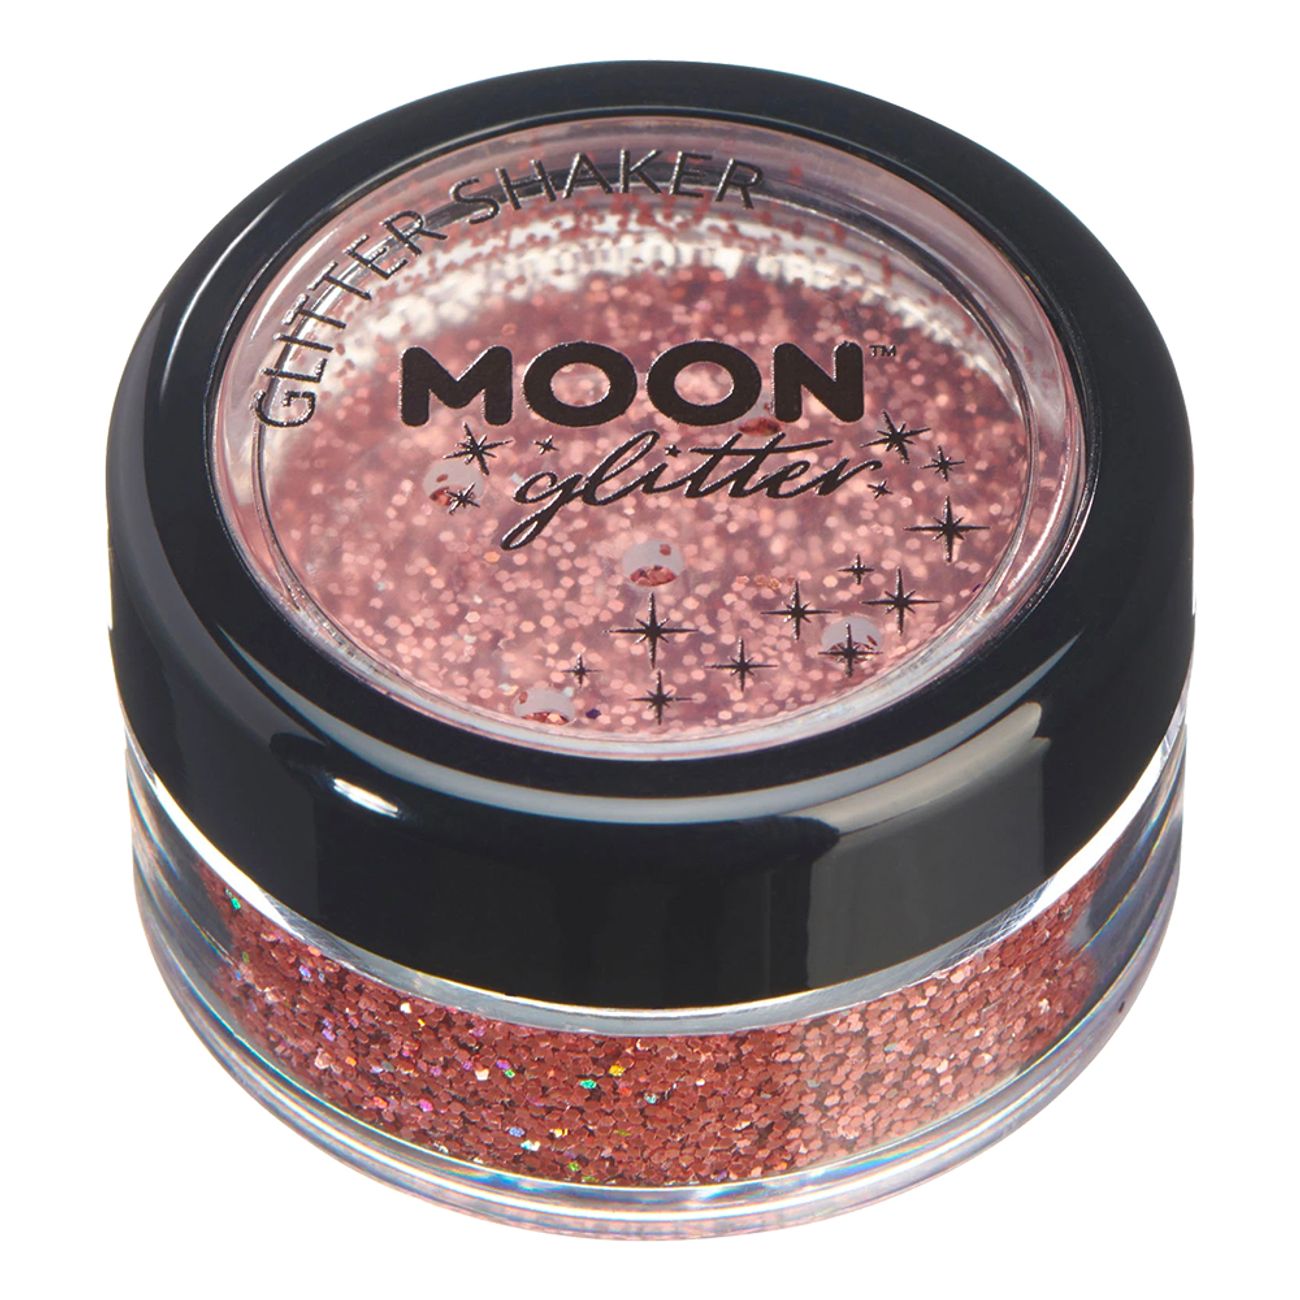 moon-creations-glitter-holographic-glitter-shakers-79749-2